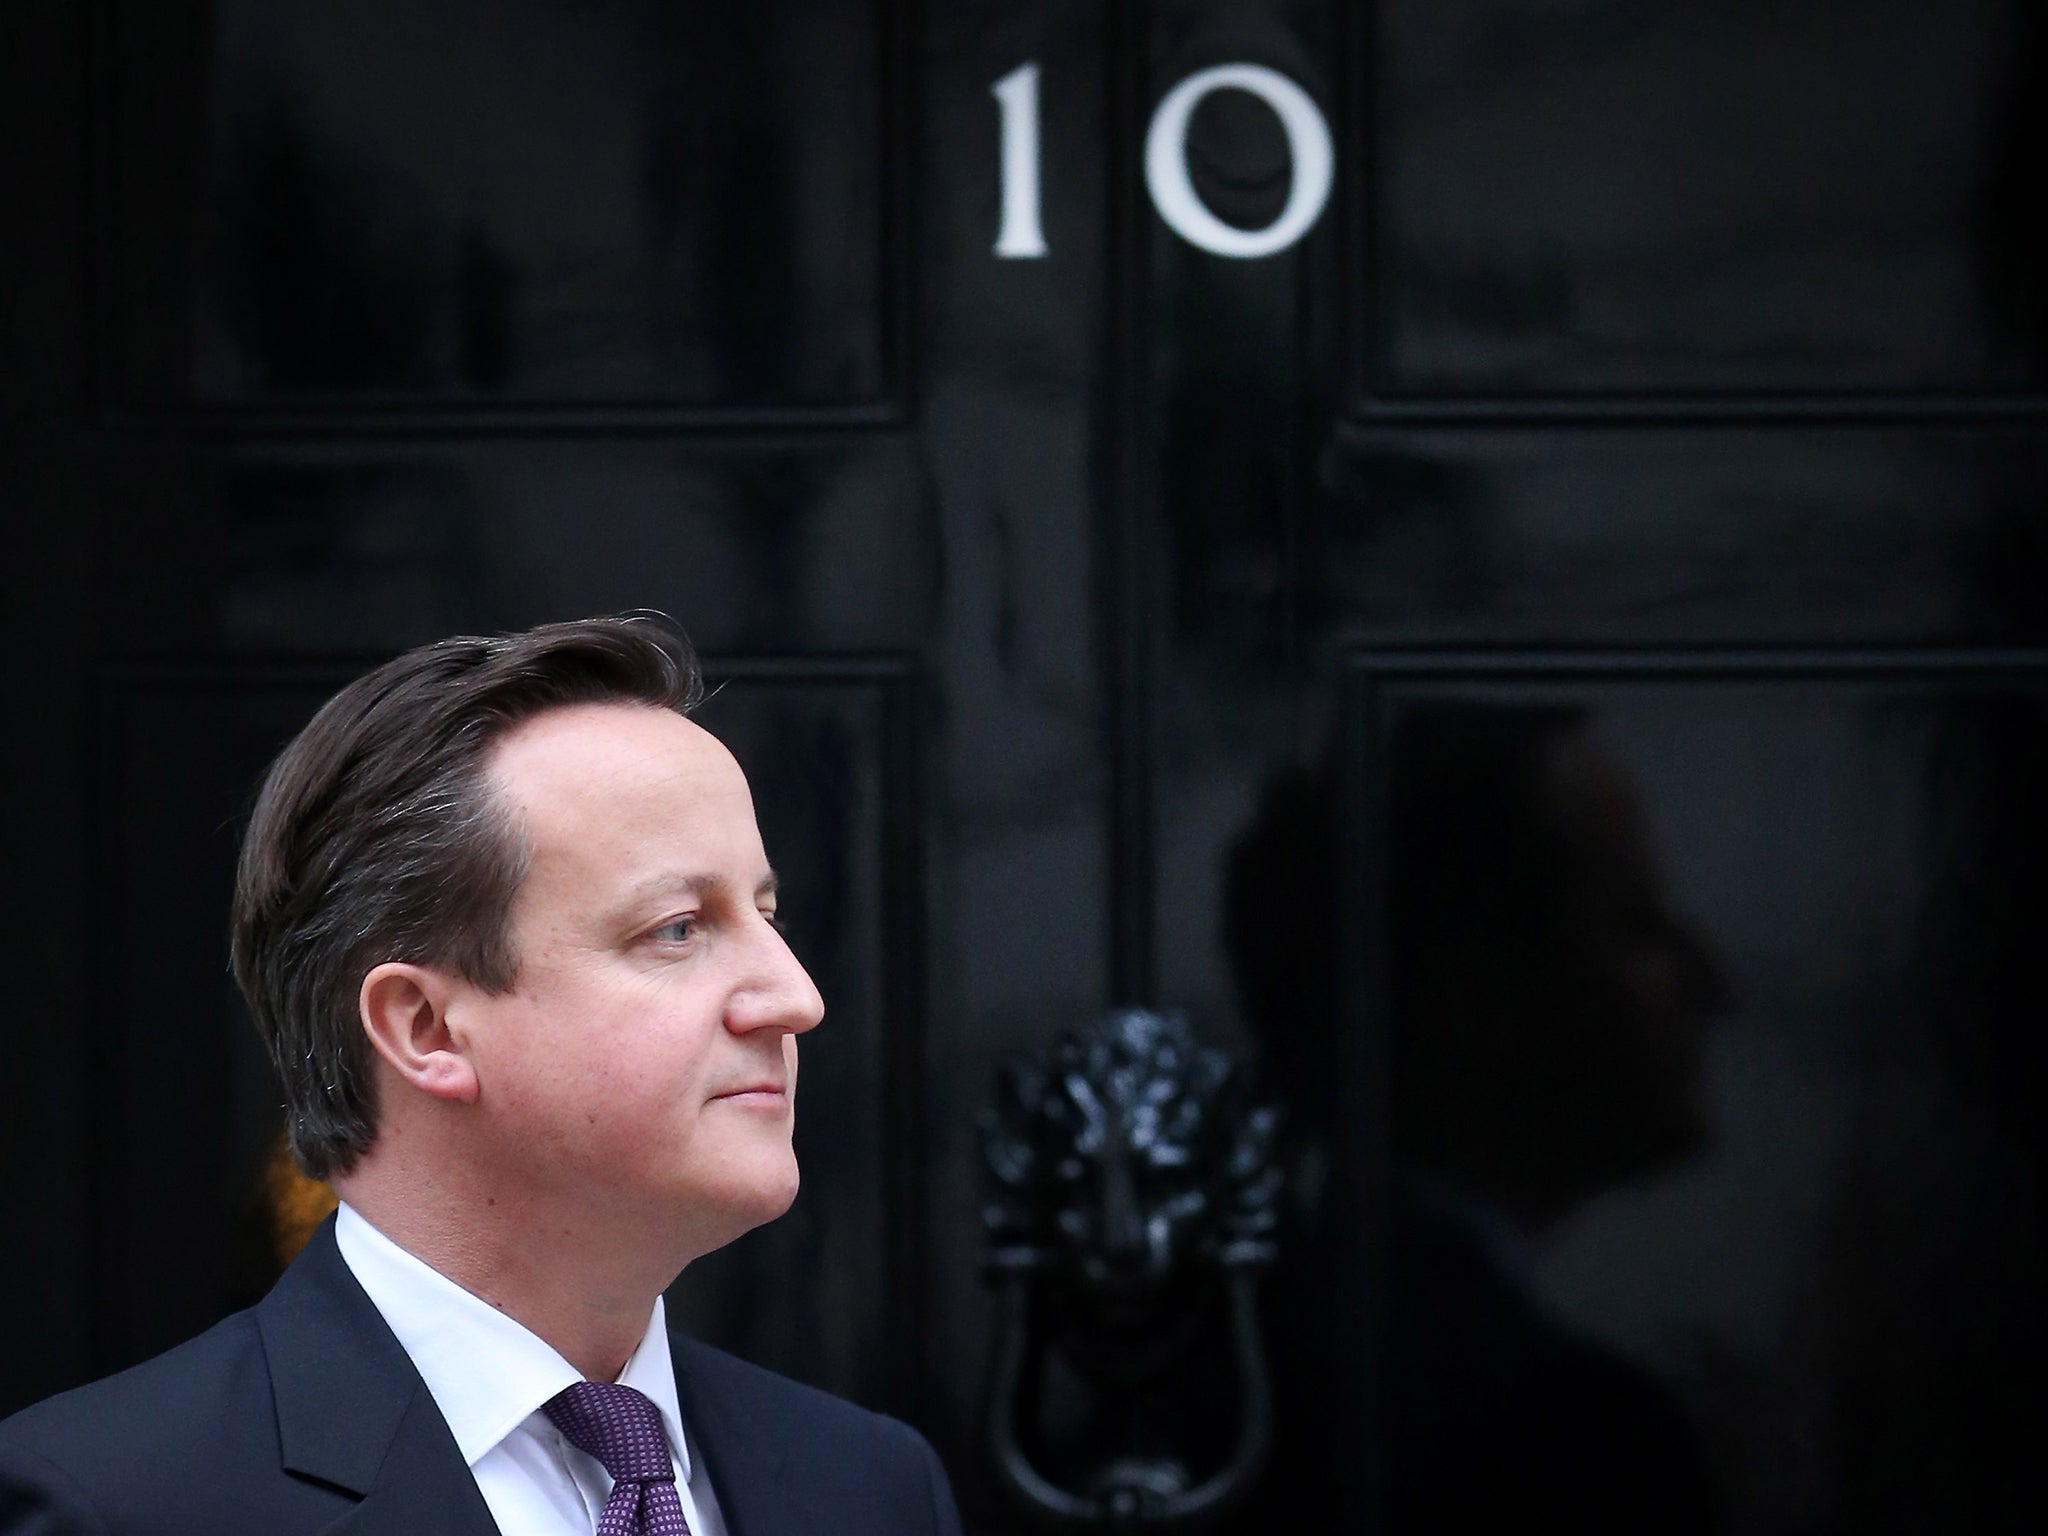 David Cameron will say that voters face an “inescapable choice” of either him or Ed Miliband in No 10